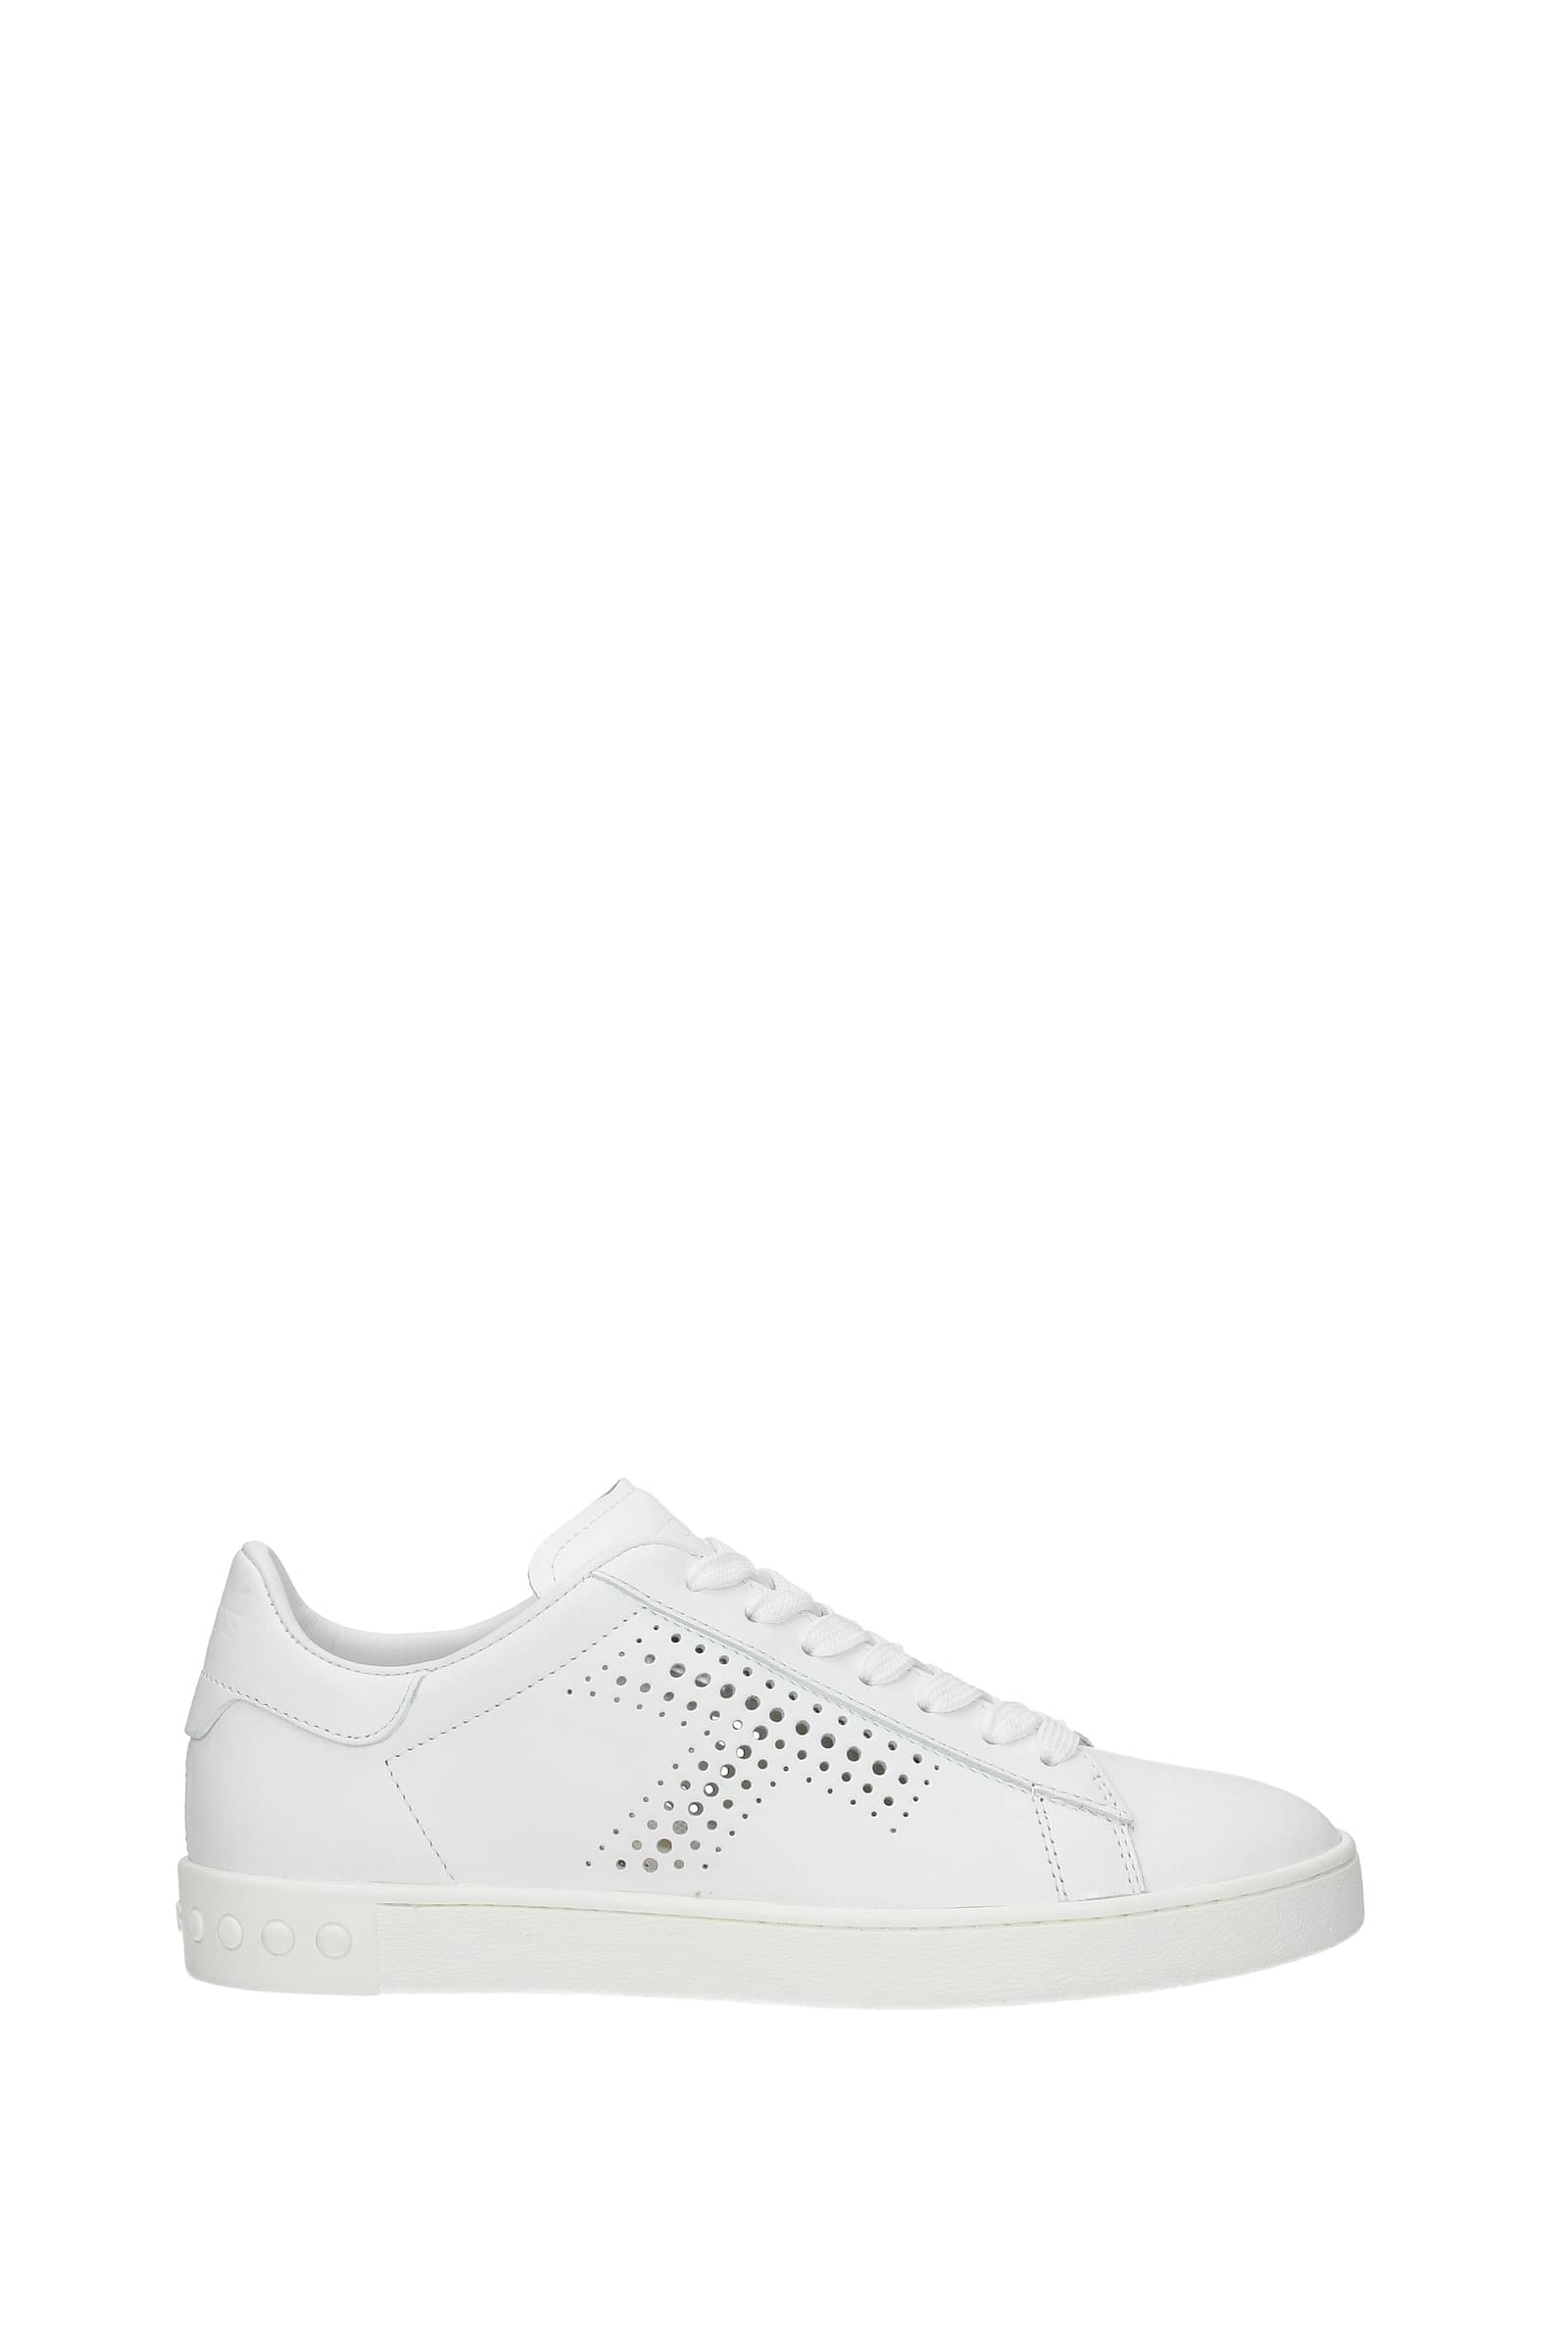 tod's leather sneakers womens